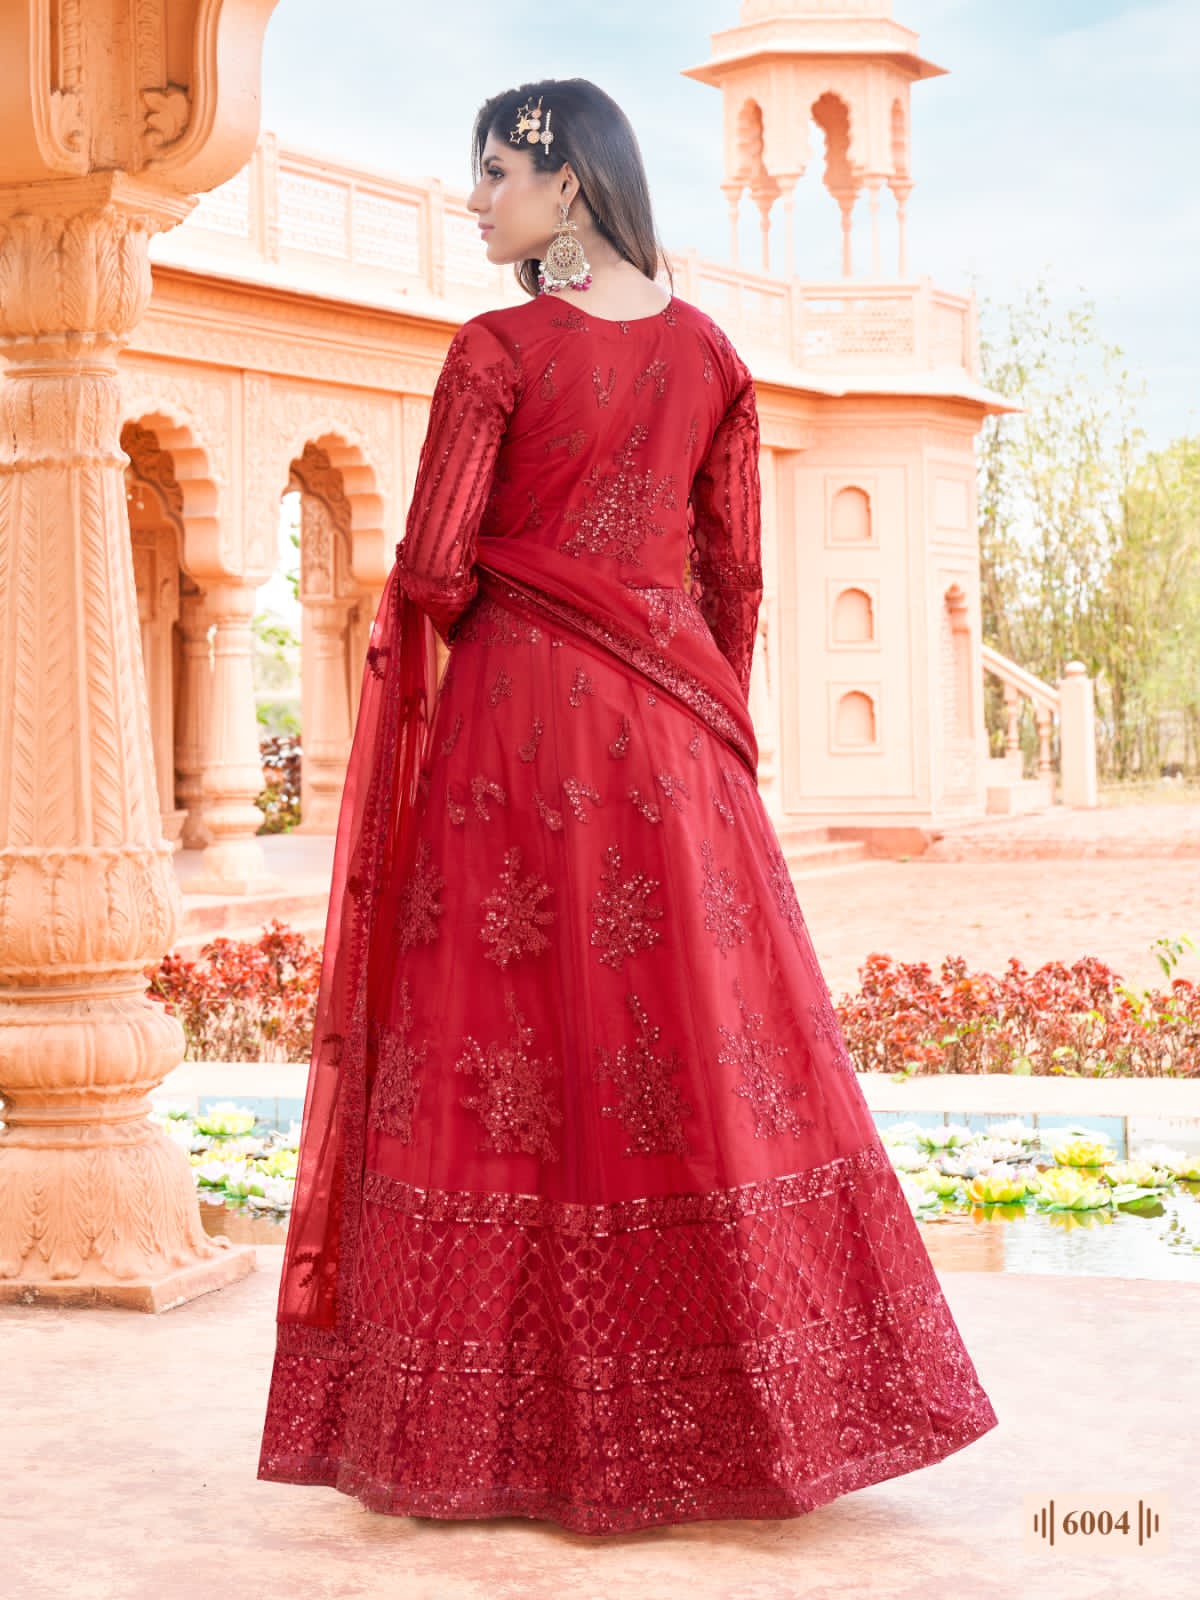 Buy Dollfashion Silk net Gown red (3-4) at Amazon.in